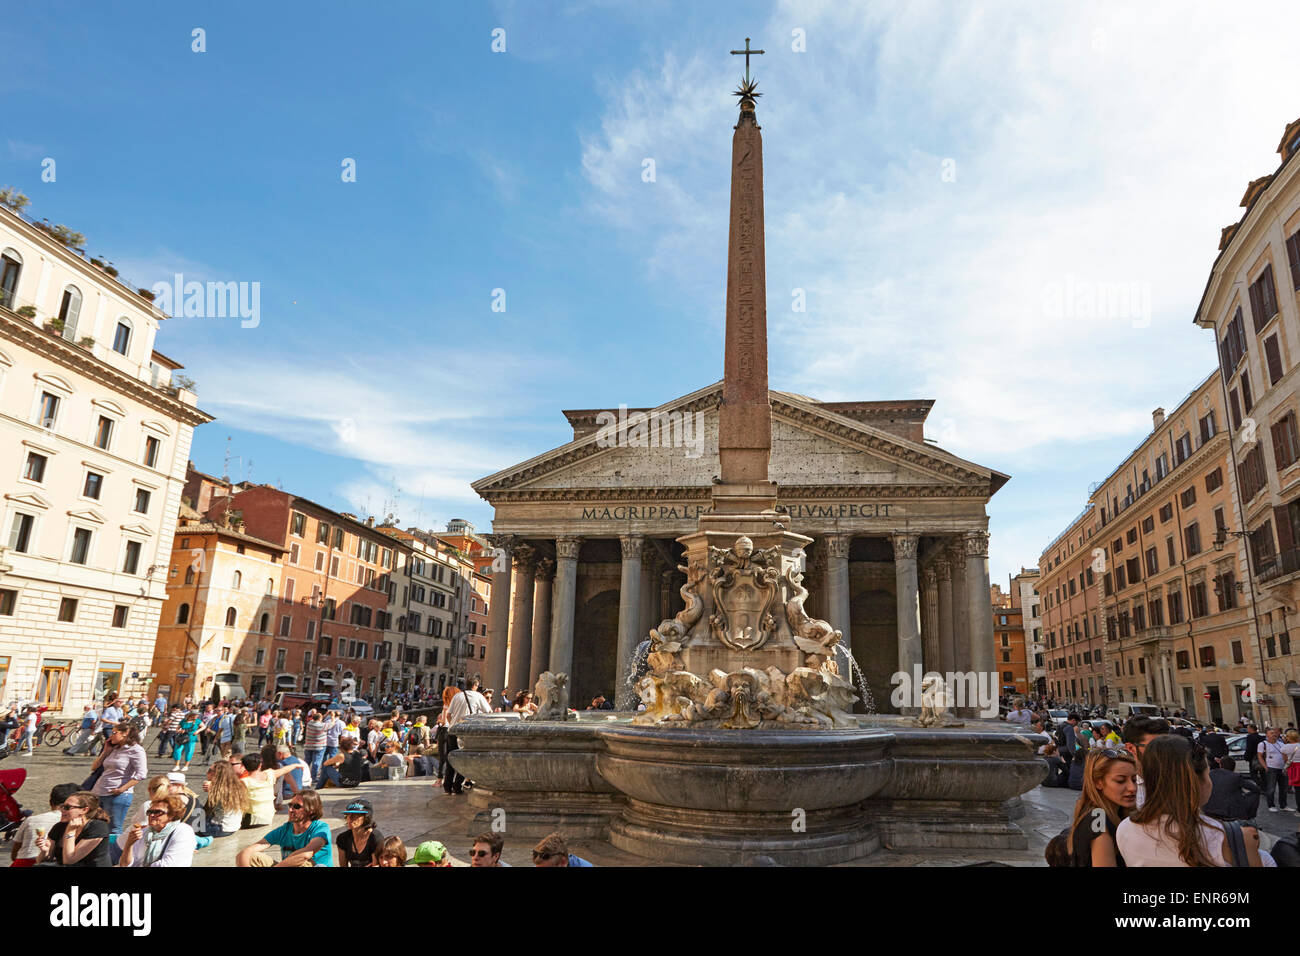 Rome The Piazza della Rotonda with the fountain Fontana del Pantheon and Egyptian obelisk in front of the Pantheon Stock Photo